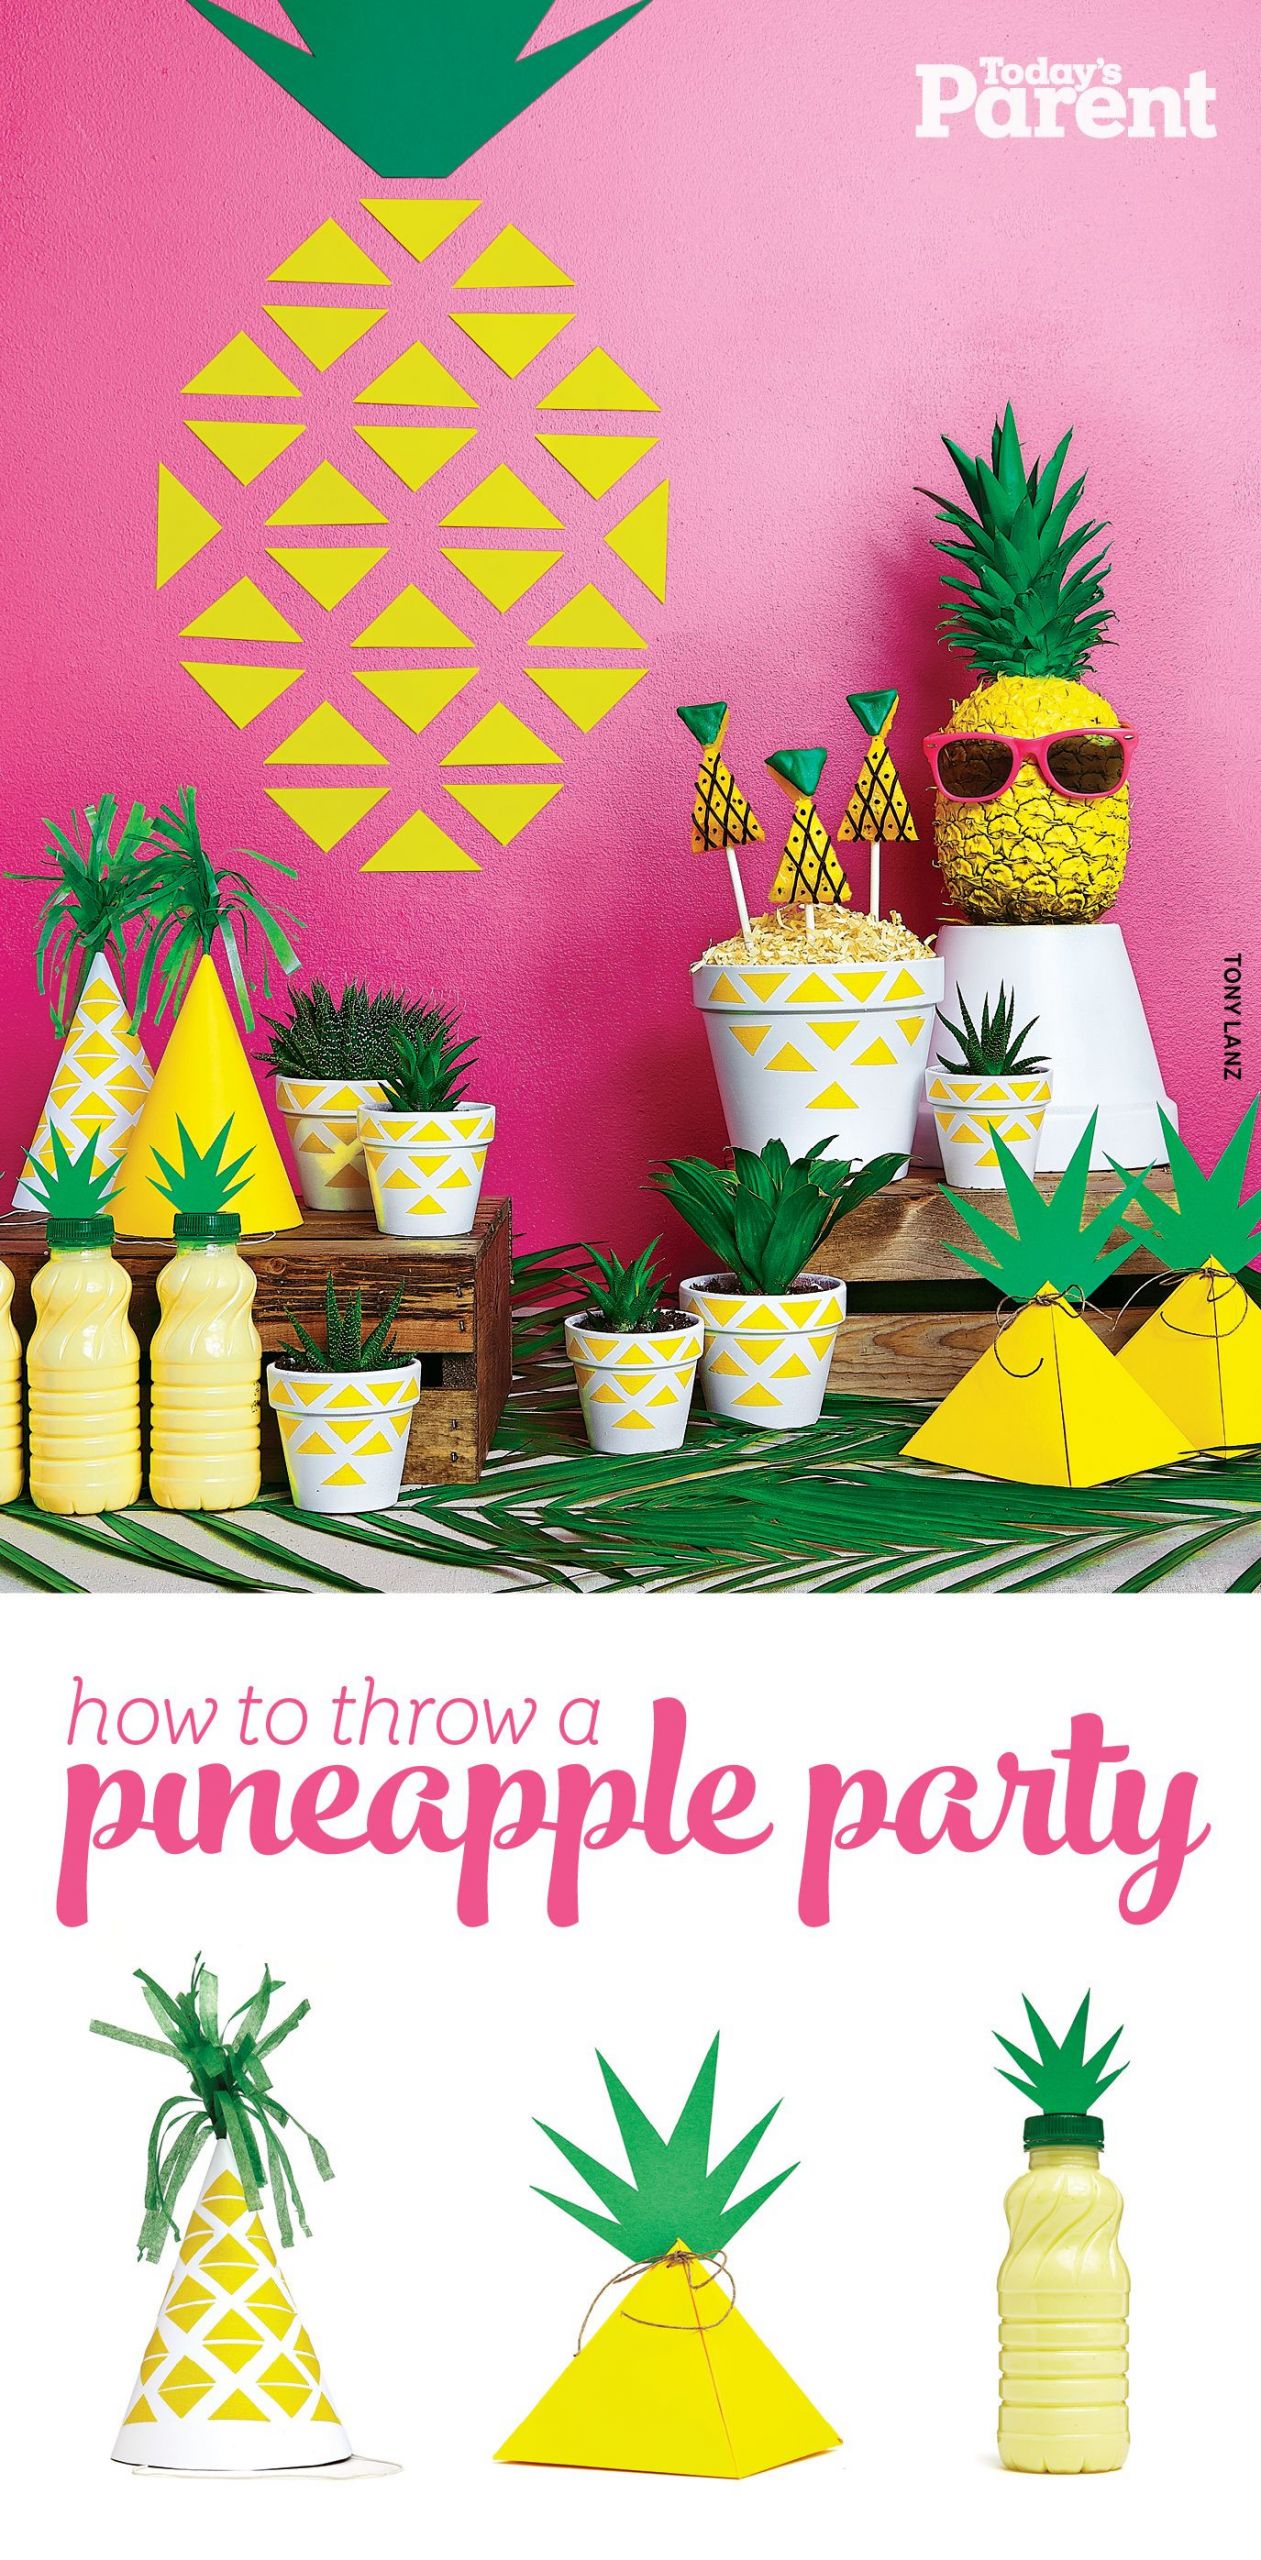 Summer In Winter Party Ideas
 How to throw a pineapple party